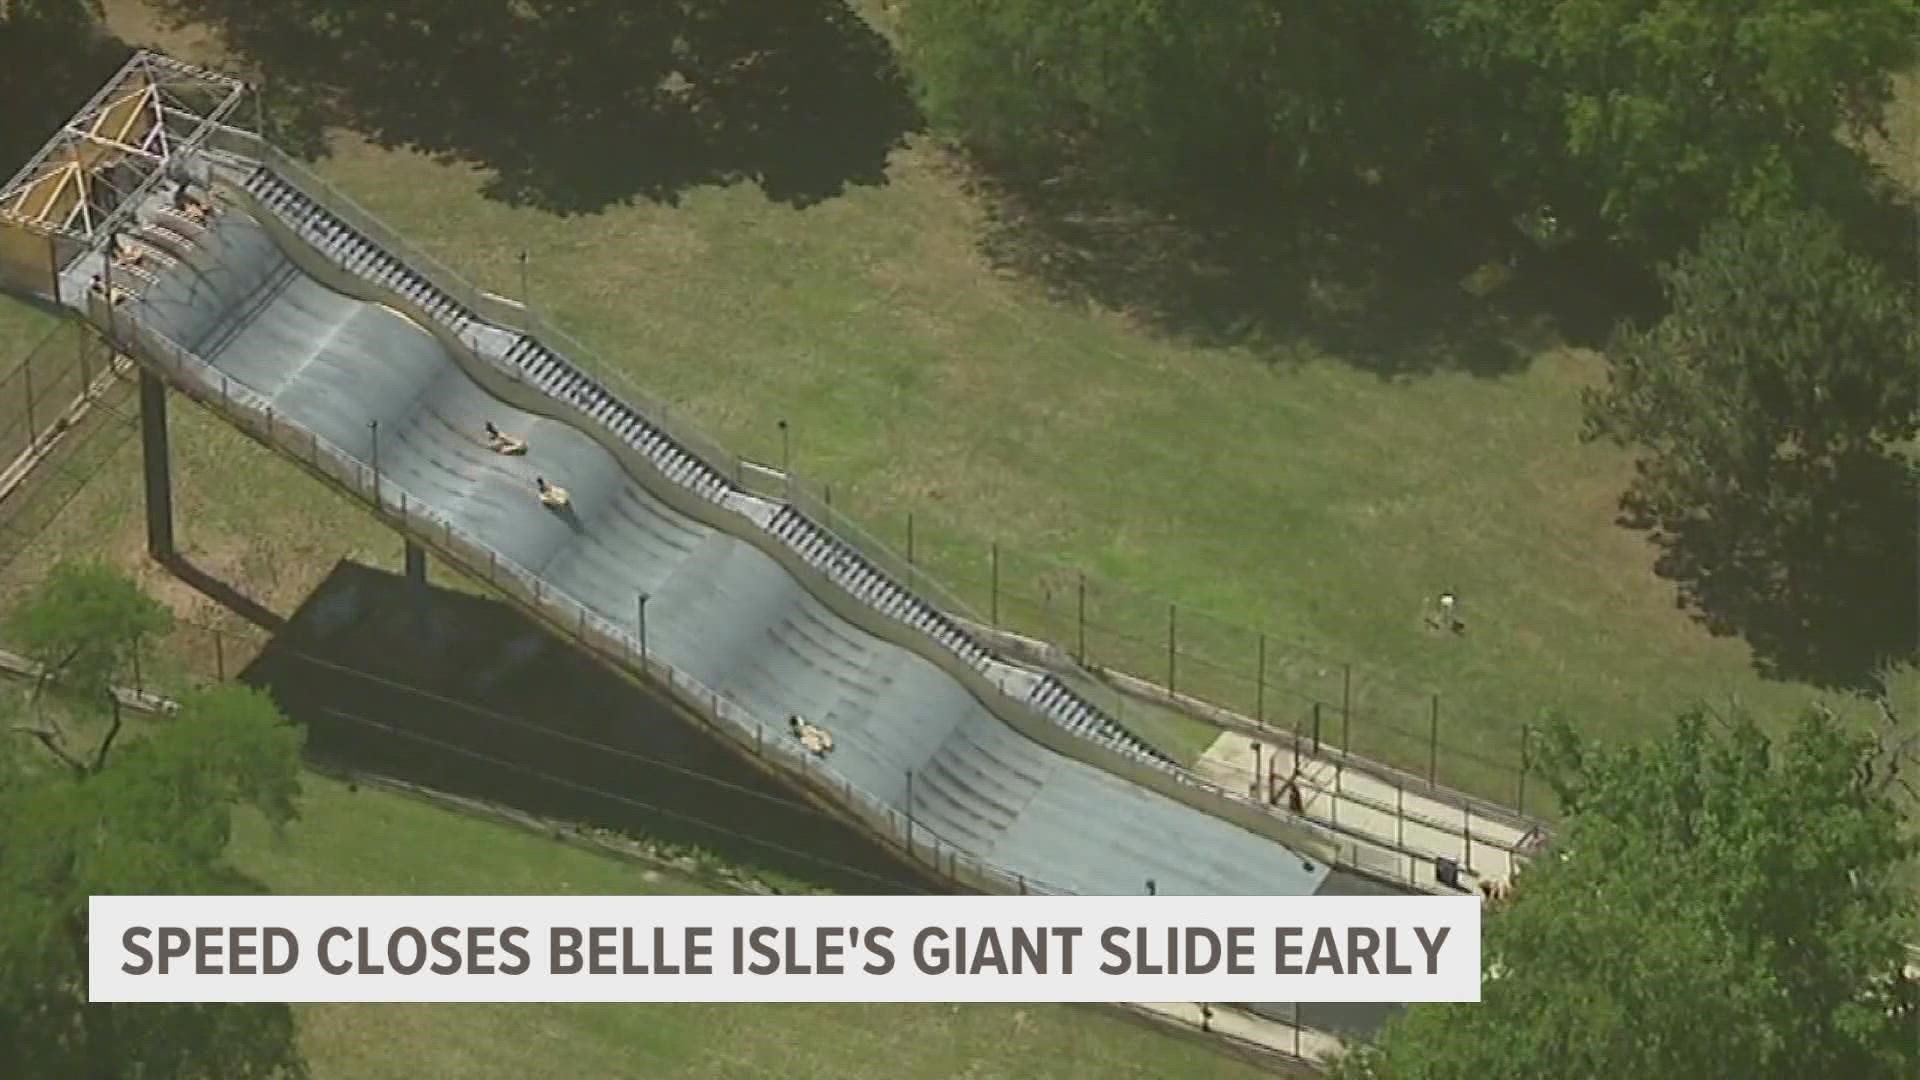 Video shows riders speeding down the slide, catching air on the bumps and slamming back onto the metal track.